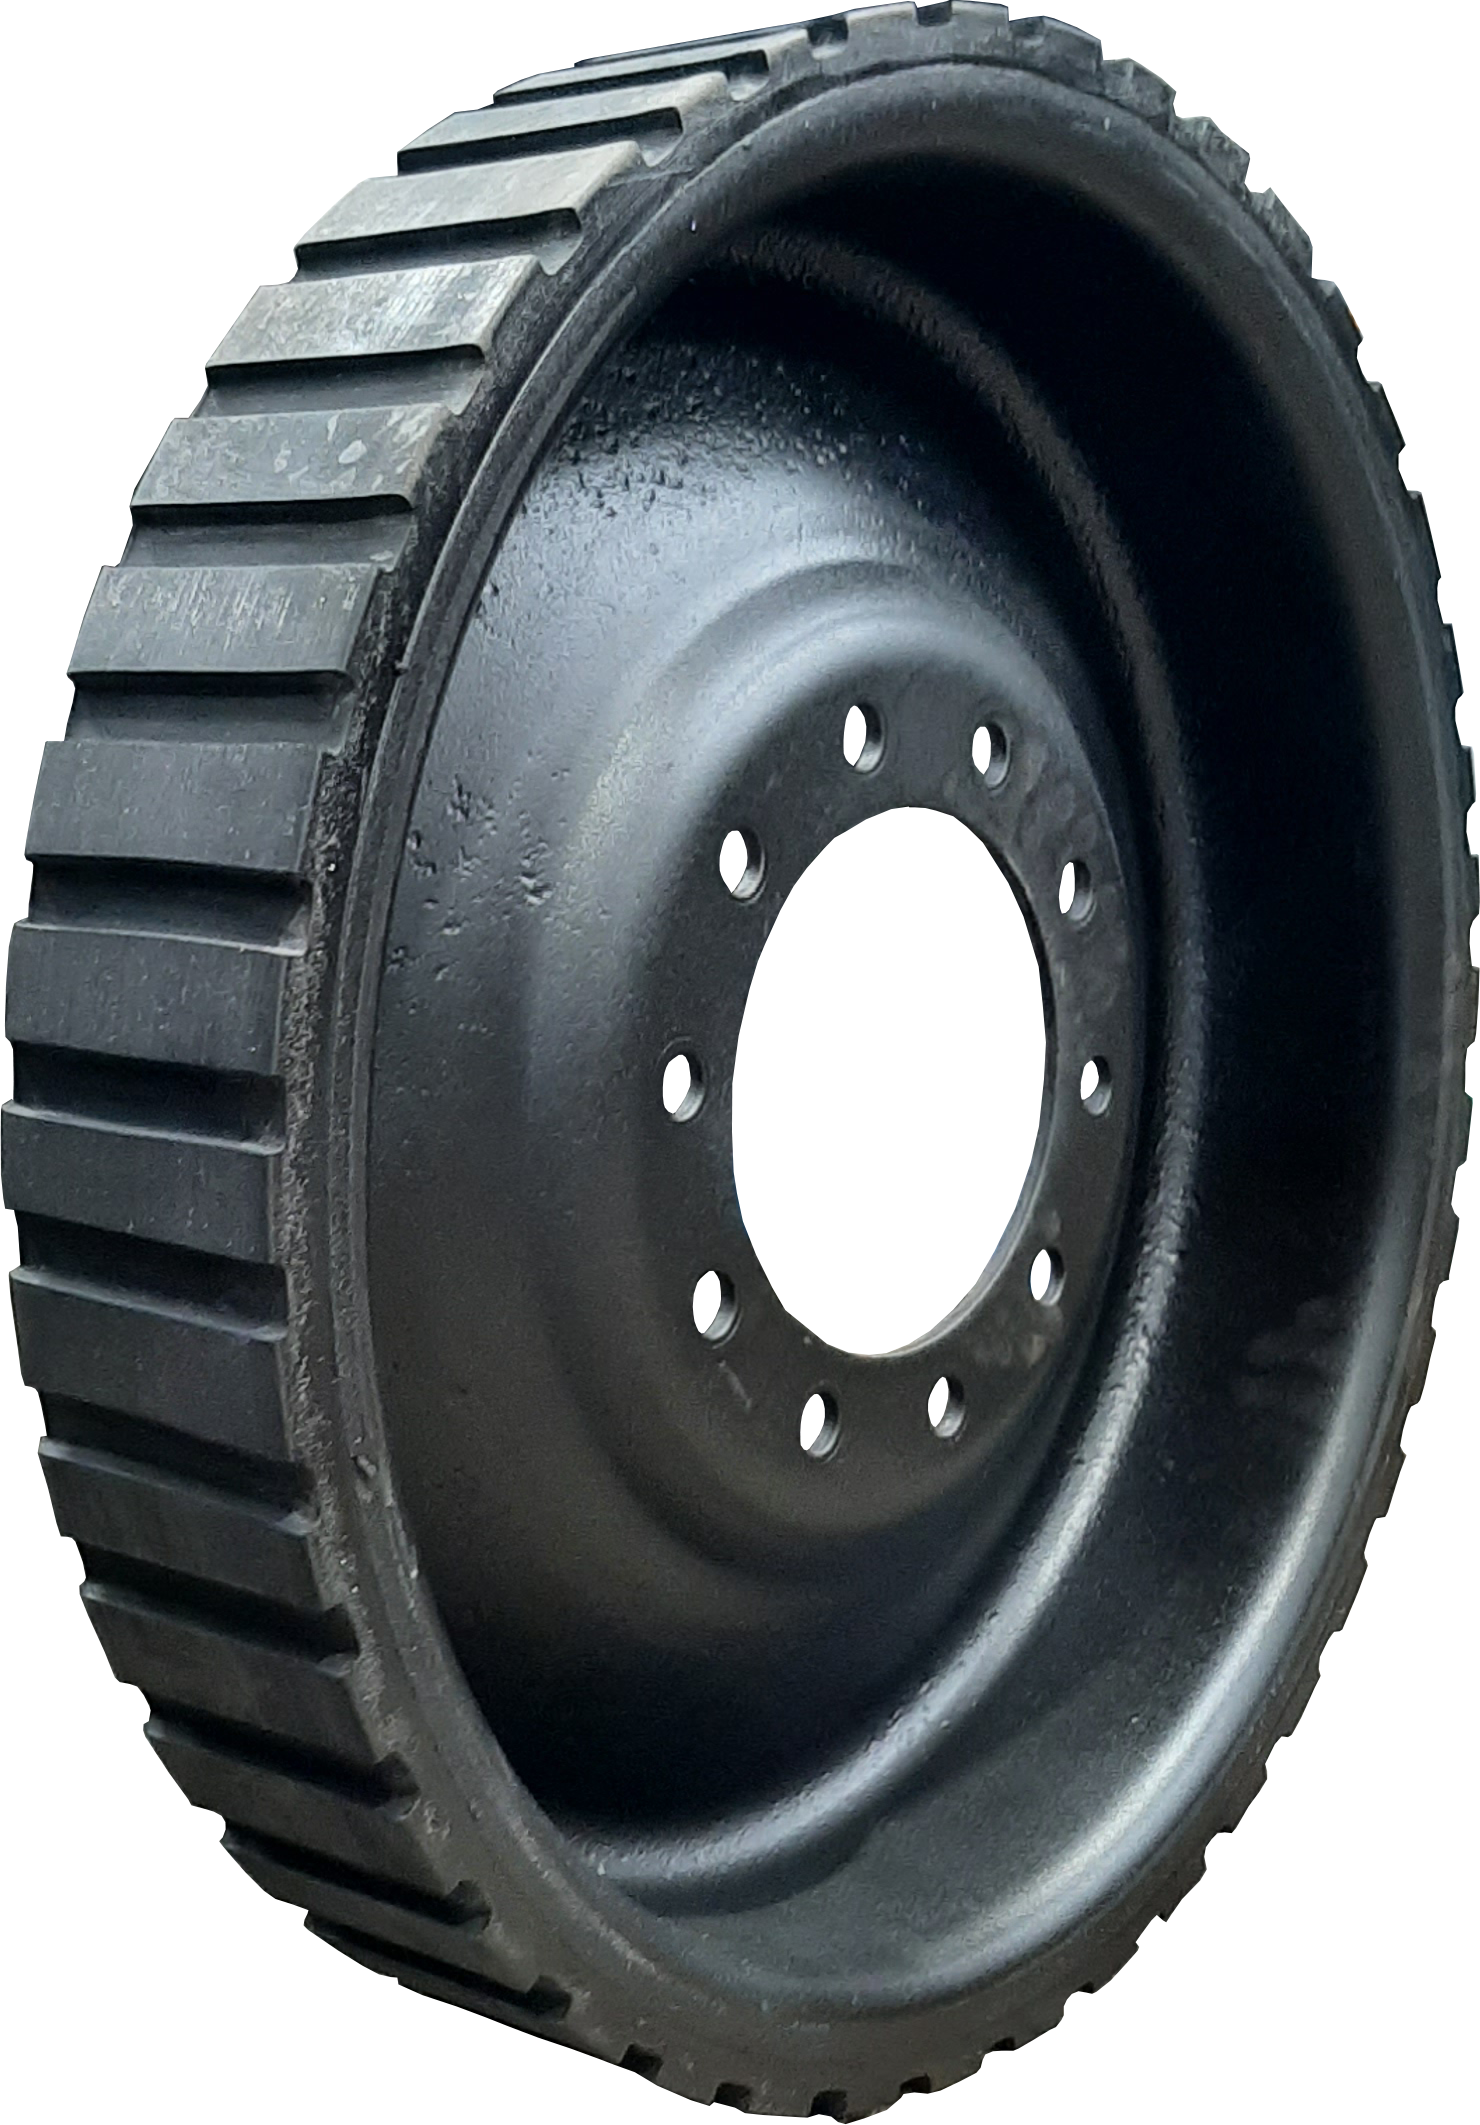 Example image for Idler wheel half for Caterpillar 35-55 series tractors